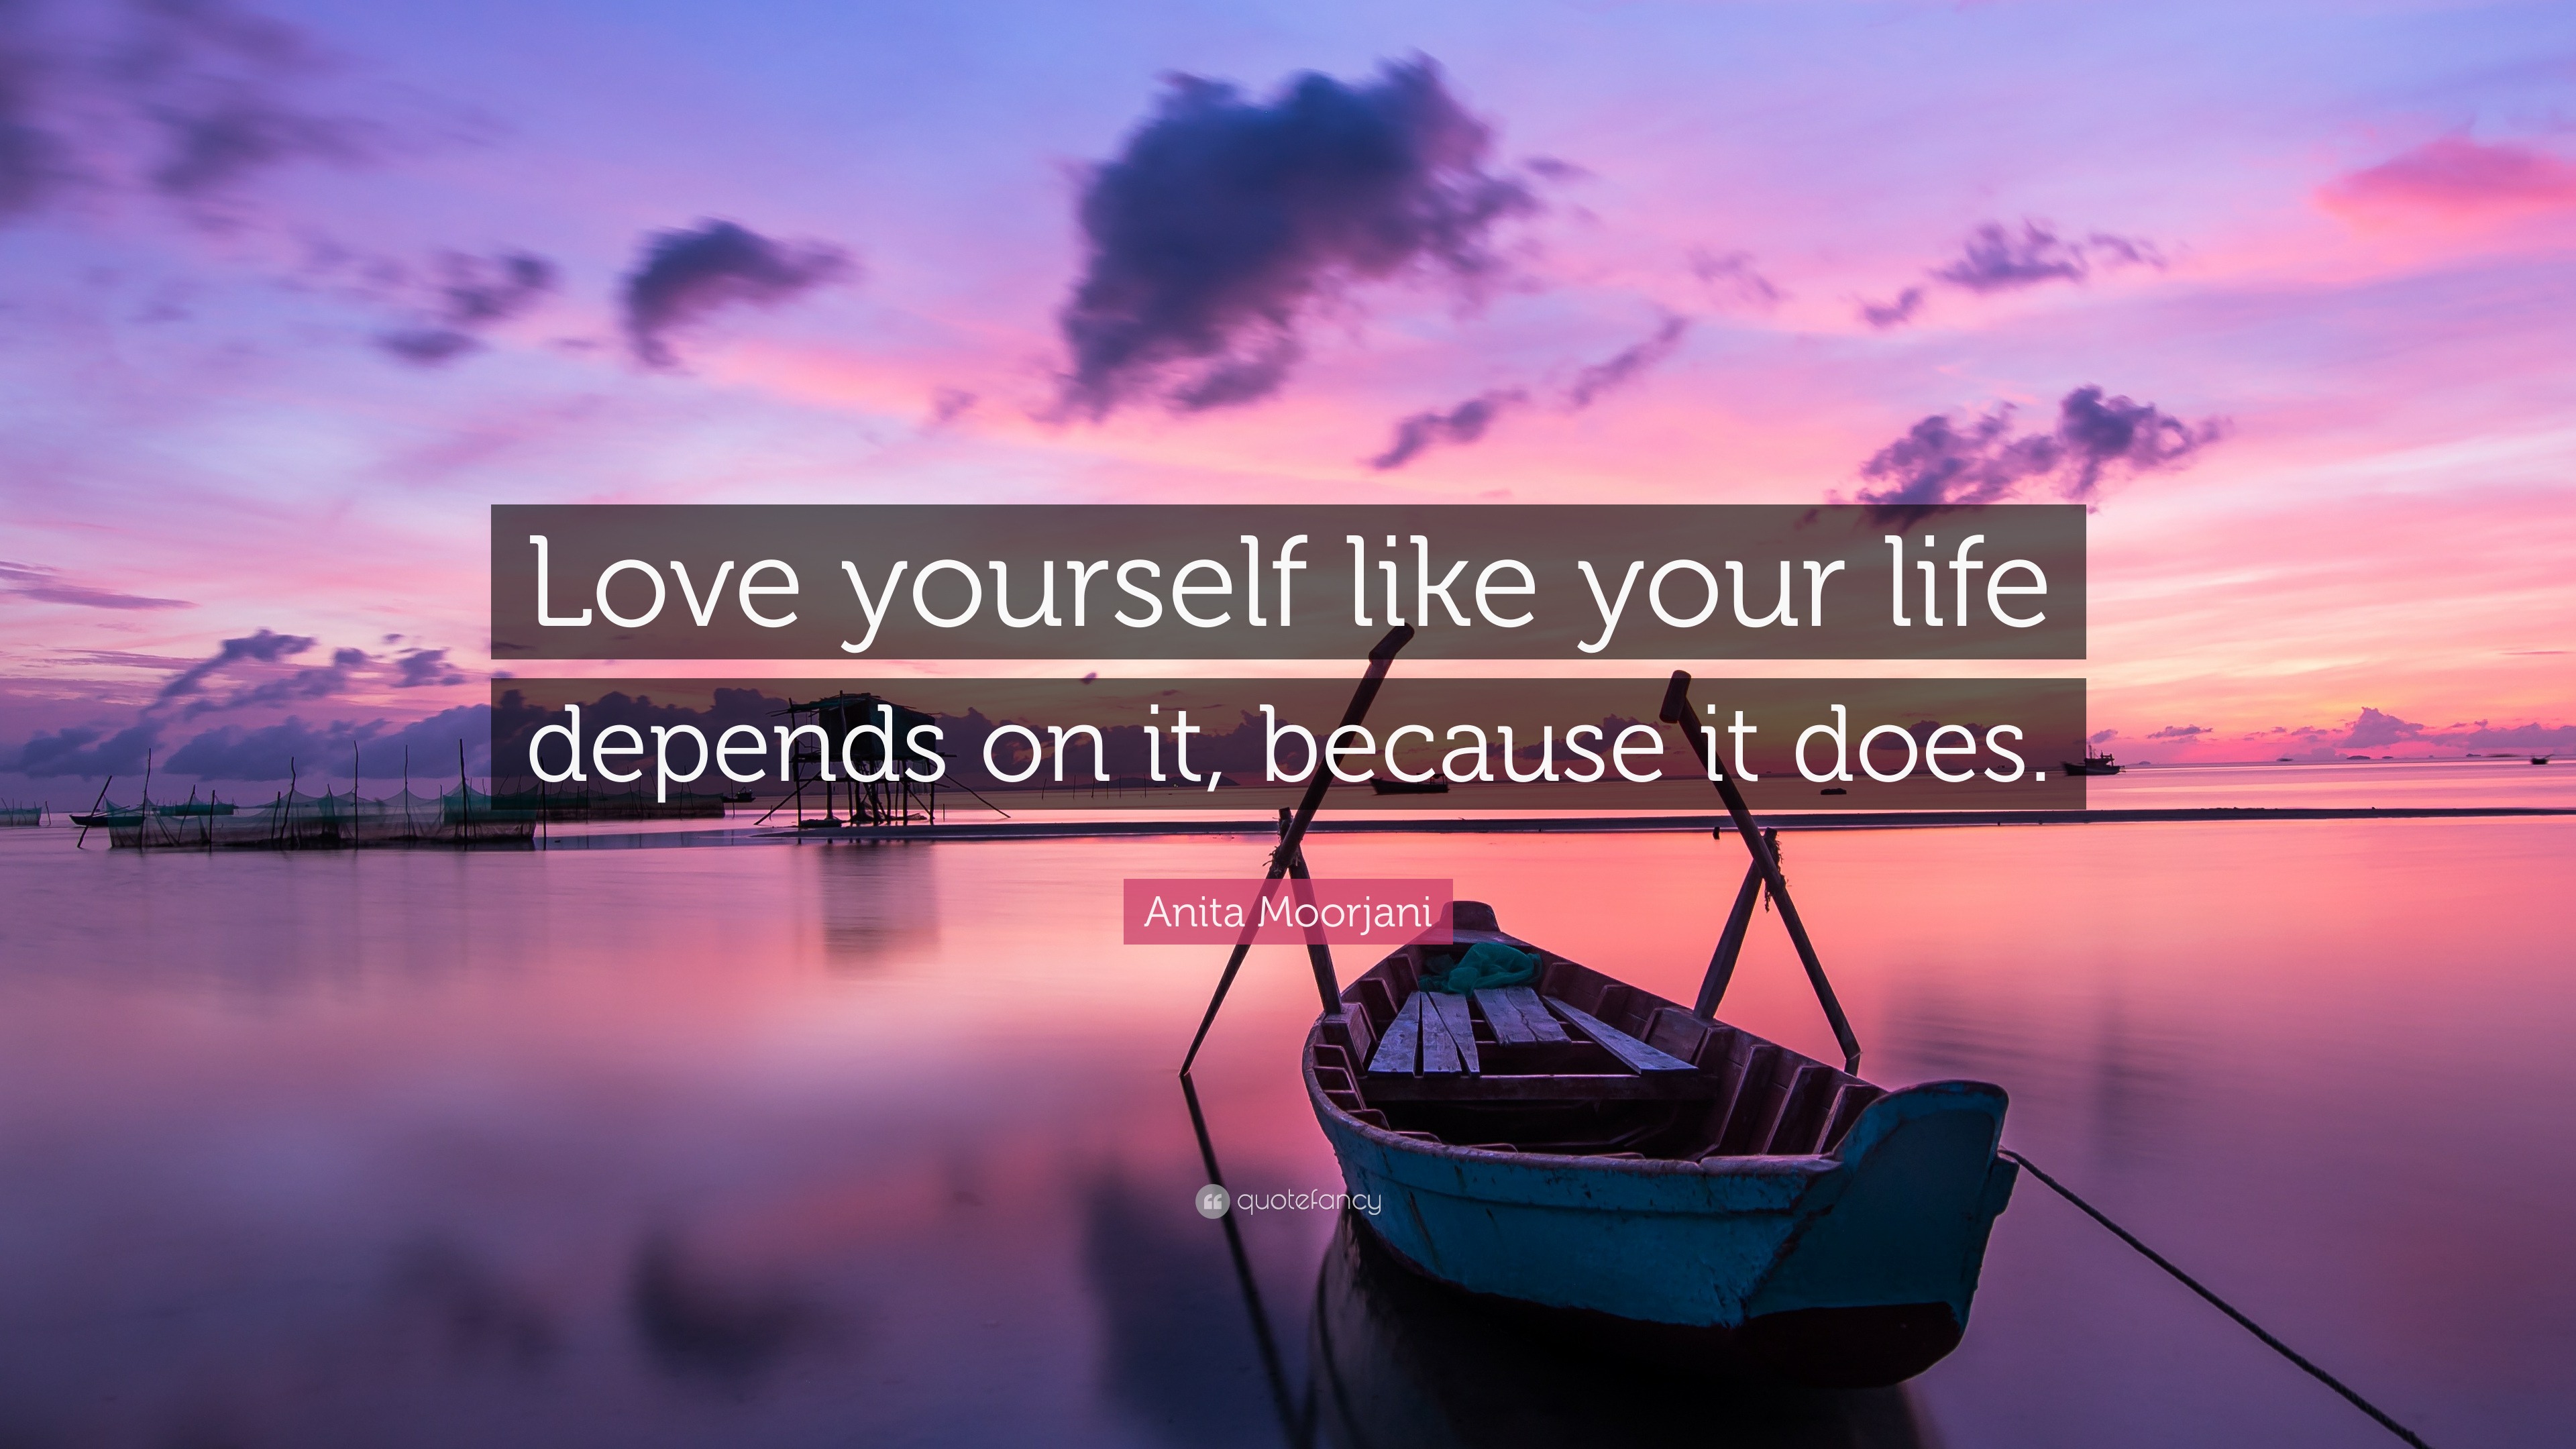 Anita Moorjani Quote Love Yourself Like Your Life Depends On It Because It